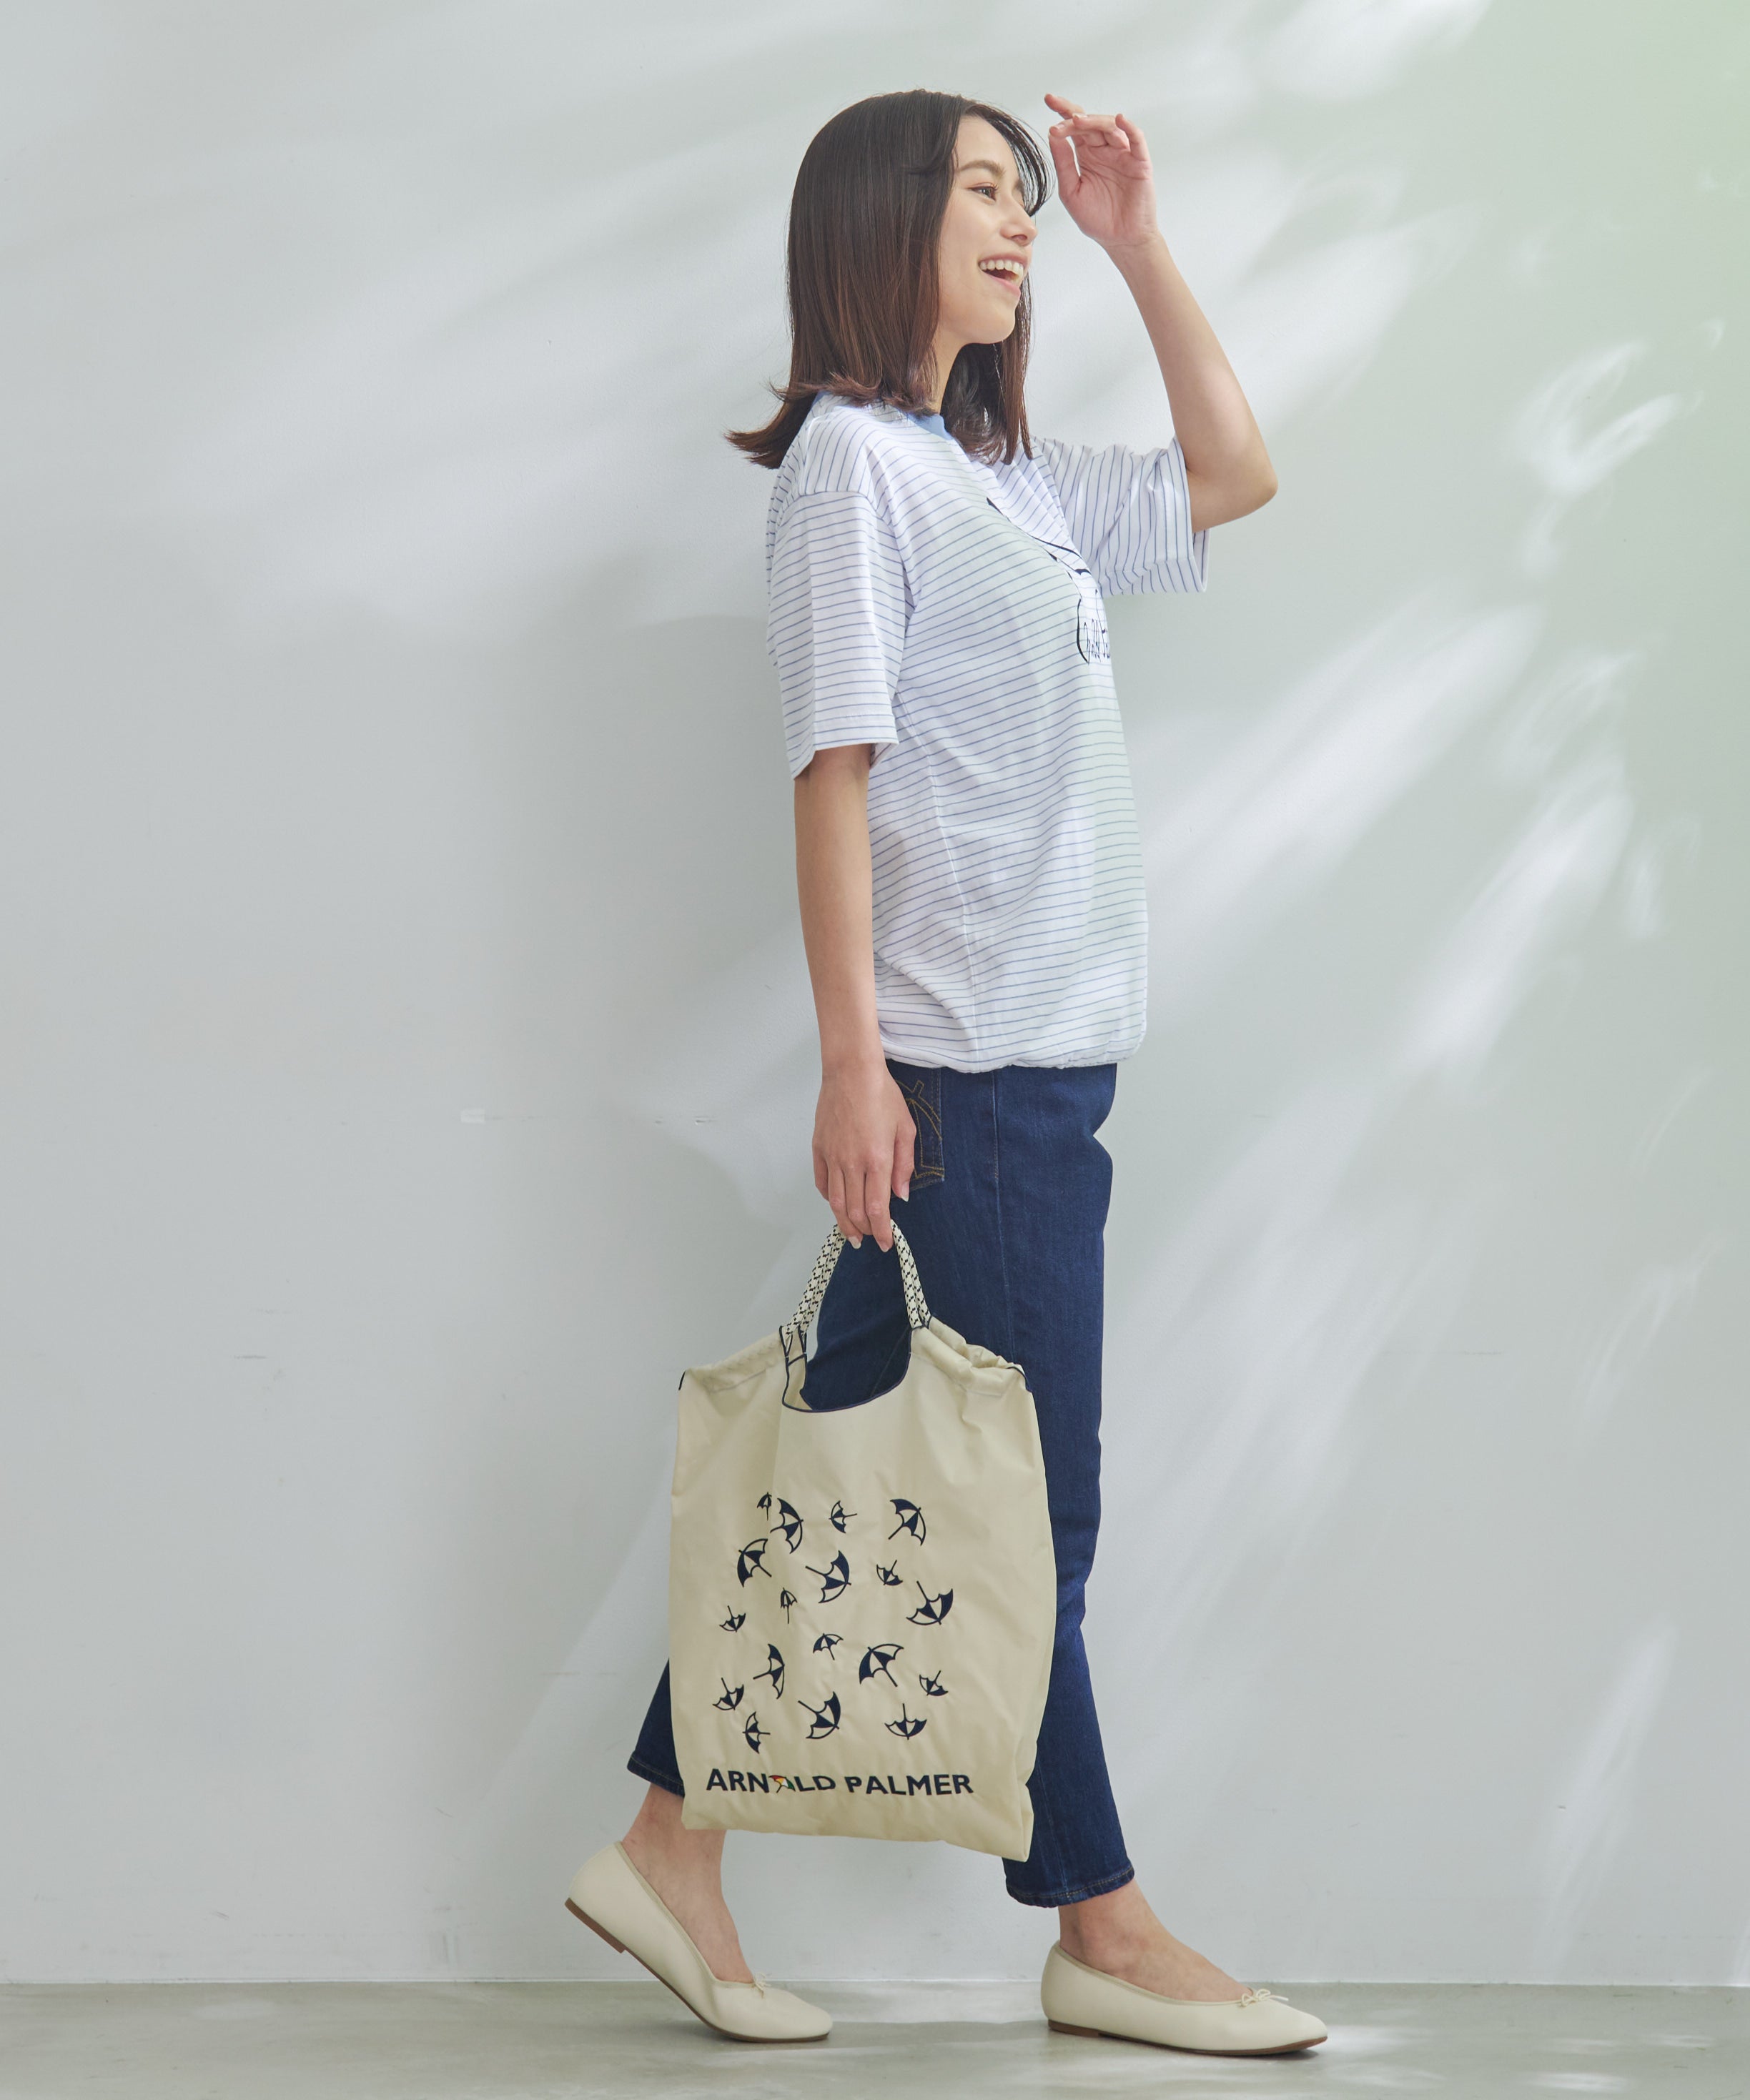 L'Appartement Graphic Tote Bag